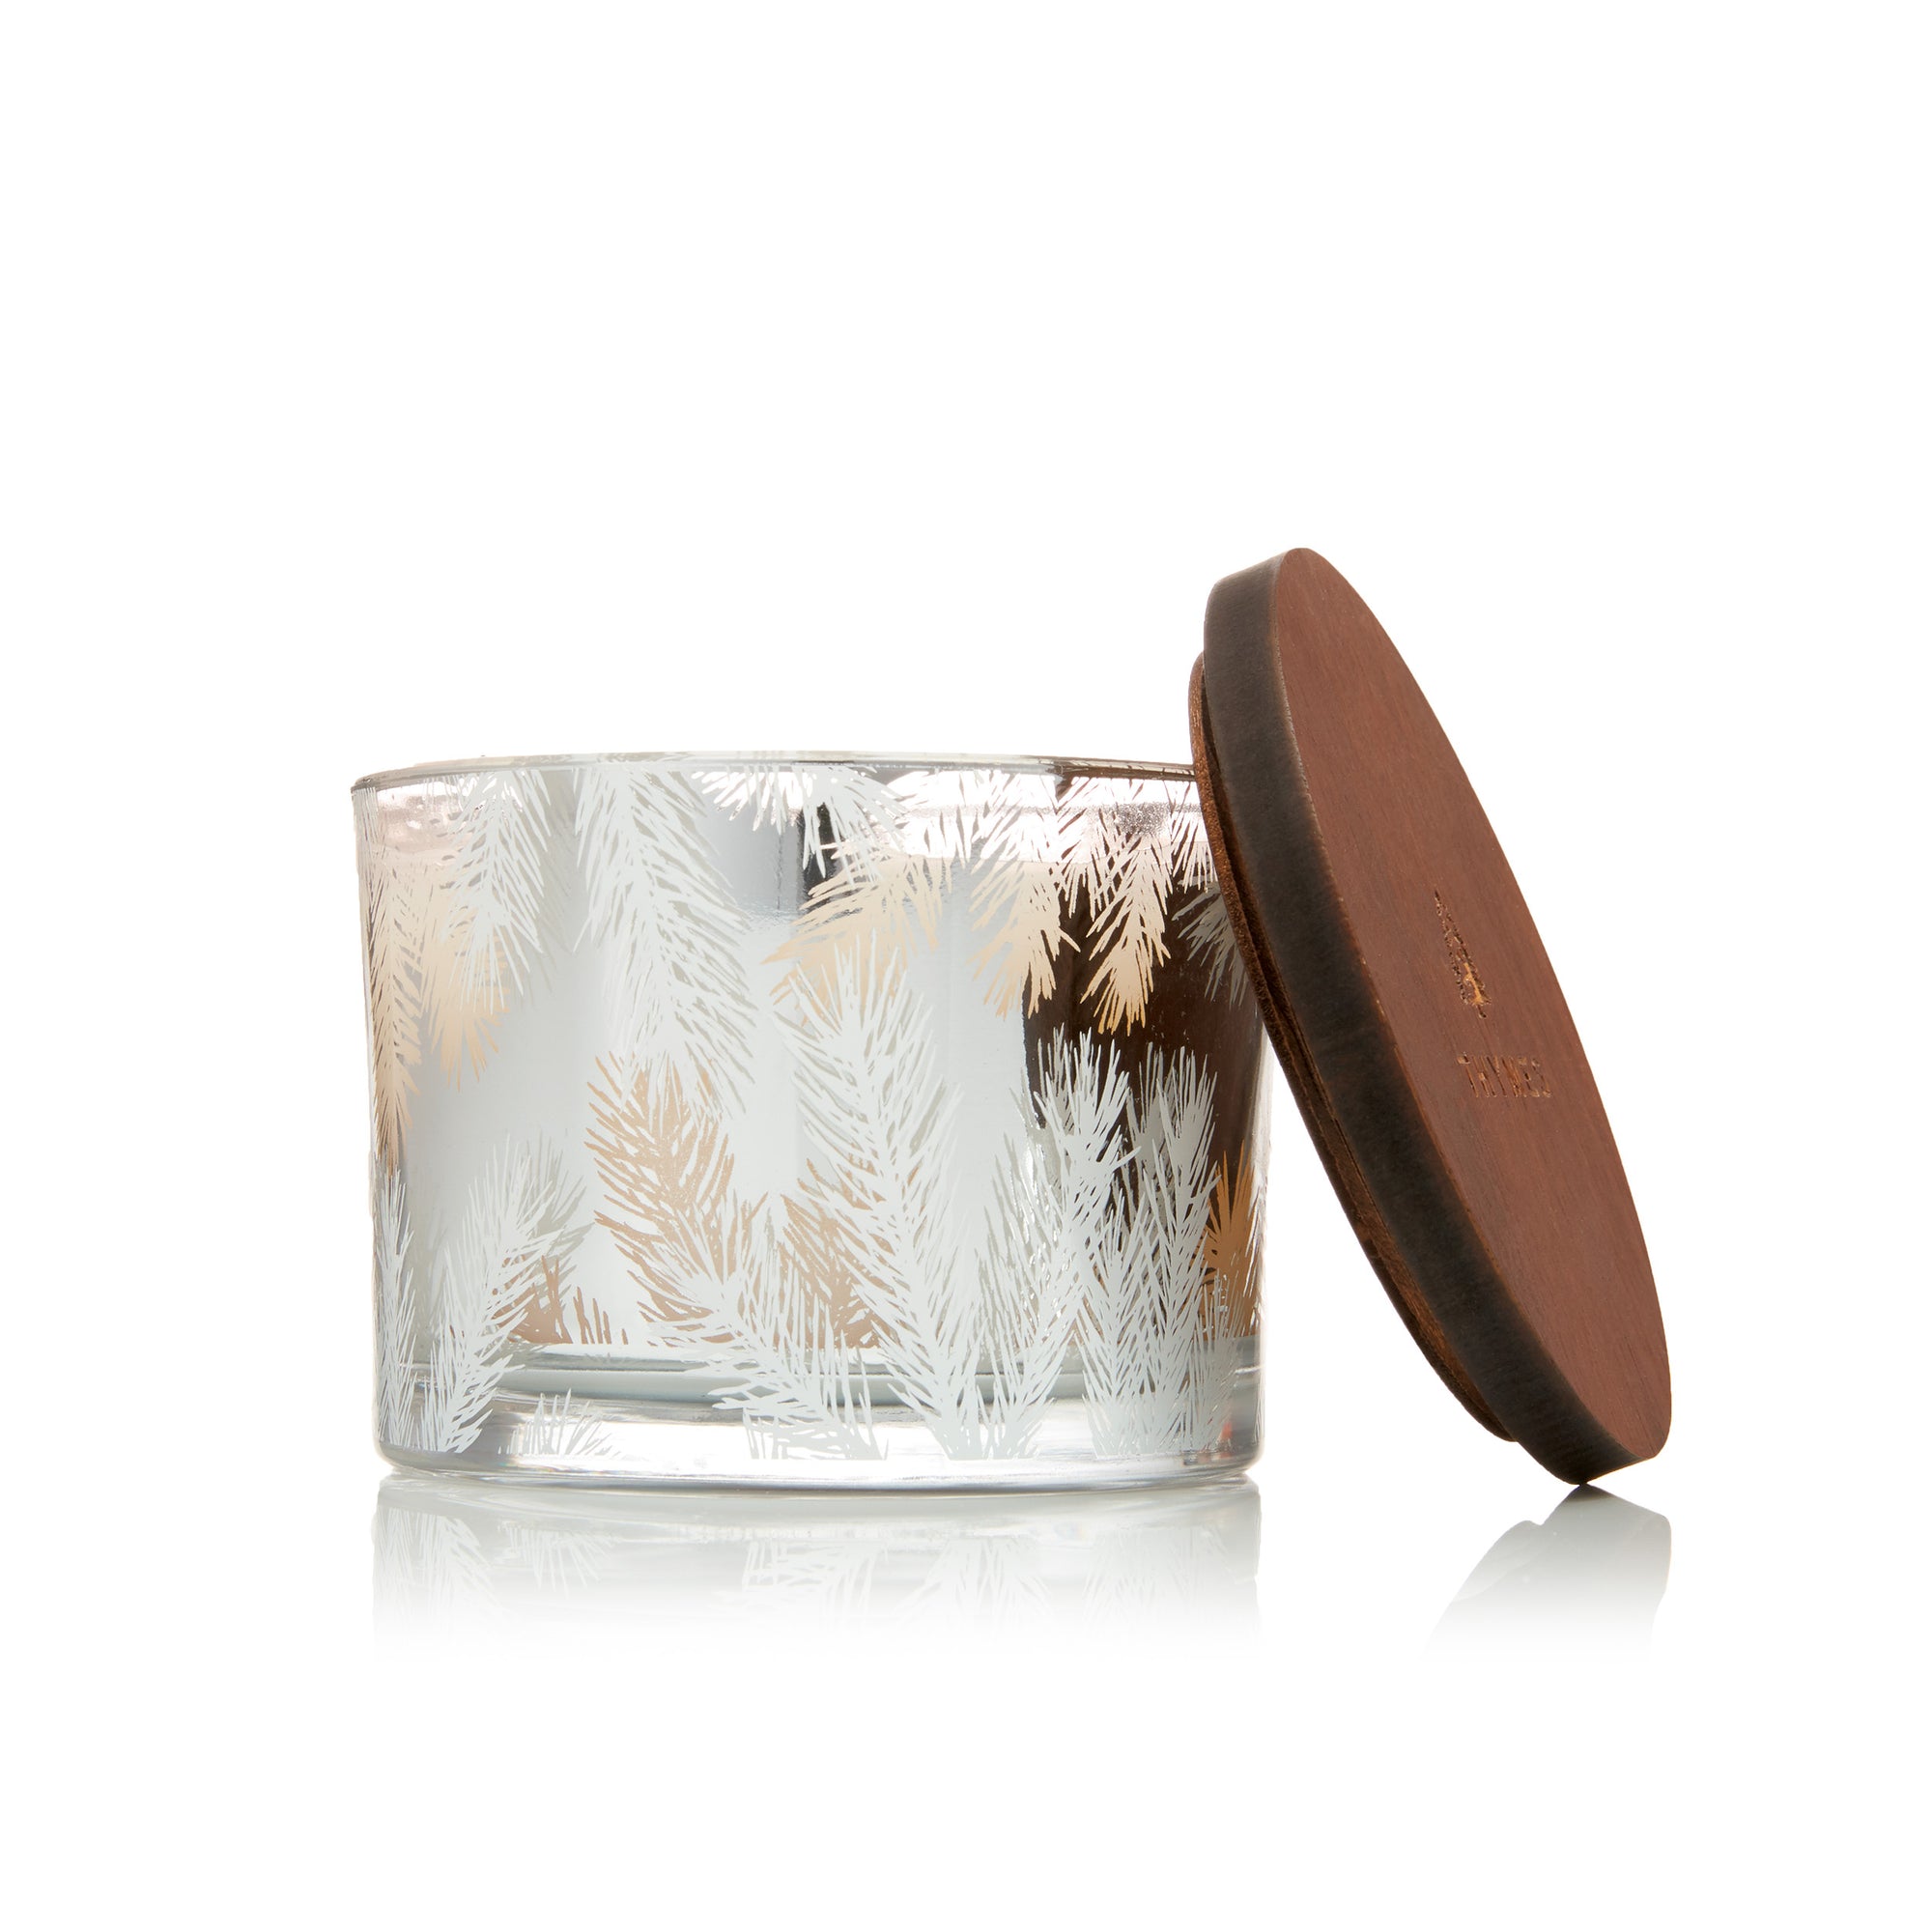 Frasier Fir Statement Poured Candle Medium 3-Wick Candle